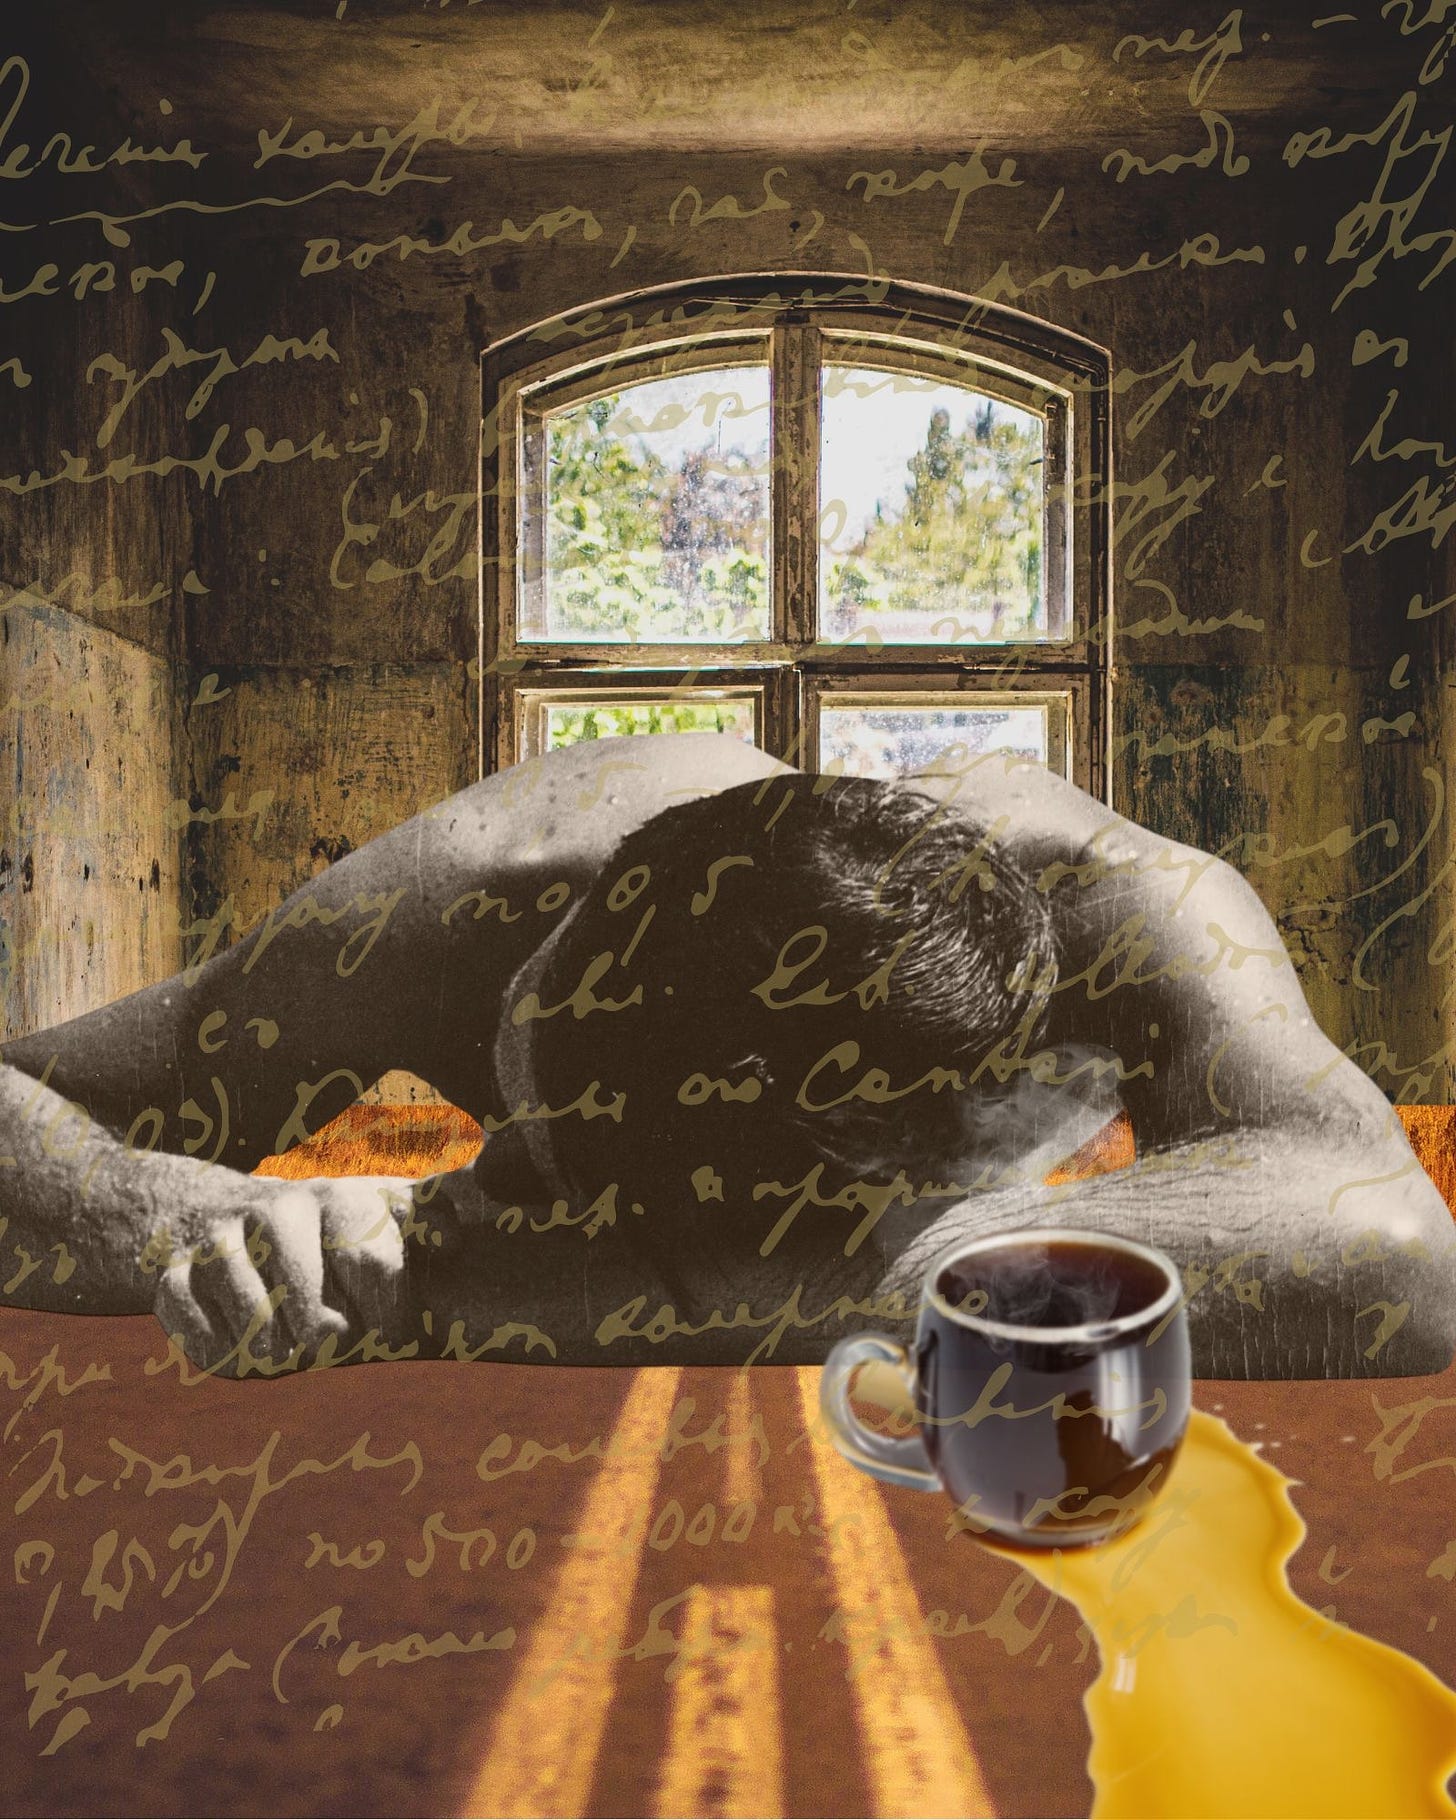 A warm colored image of a man with his head resting in between his arms. An open window is juxtaposed in the background. An open road in the foreground. A spilled coffee cup sits on his right side.